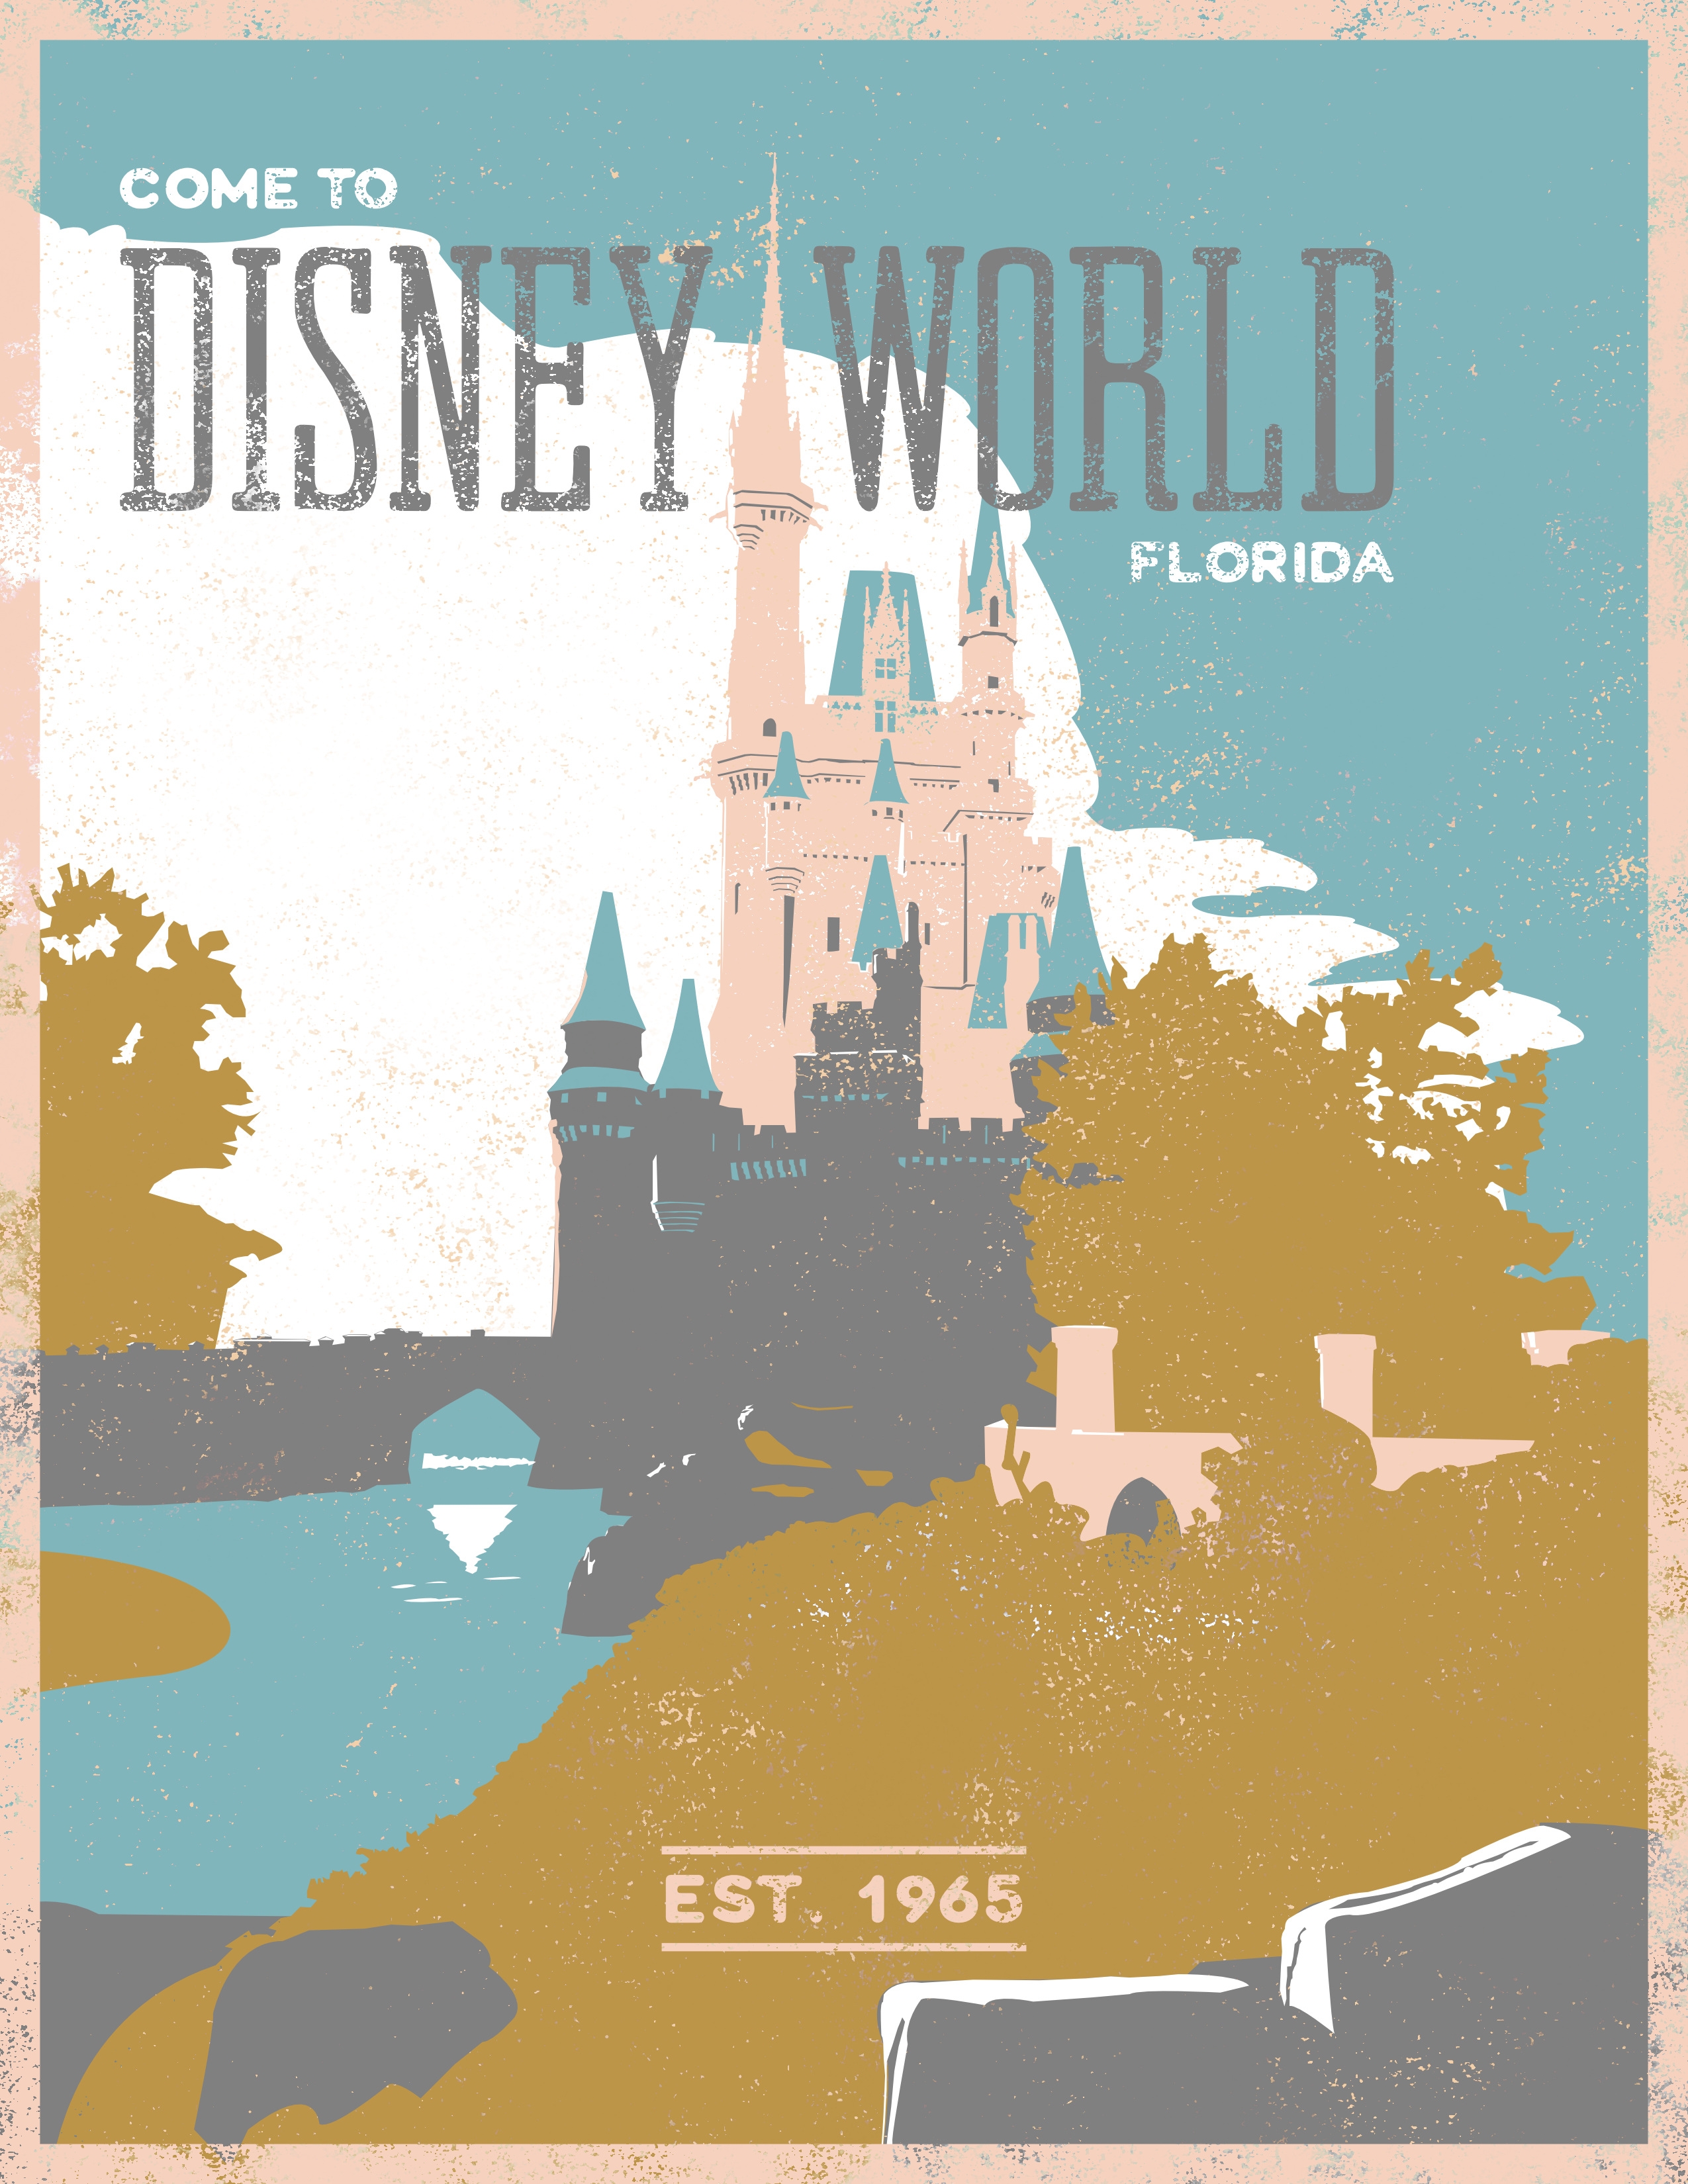 Retro style travel poster of the Cinderella Castle in Disney World